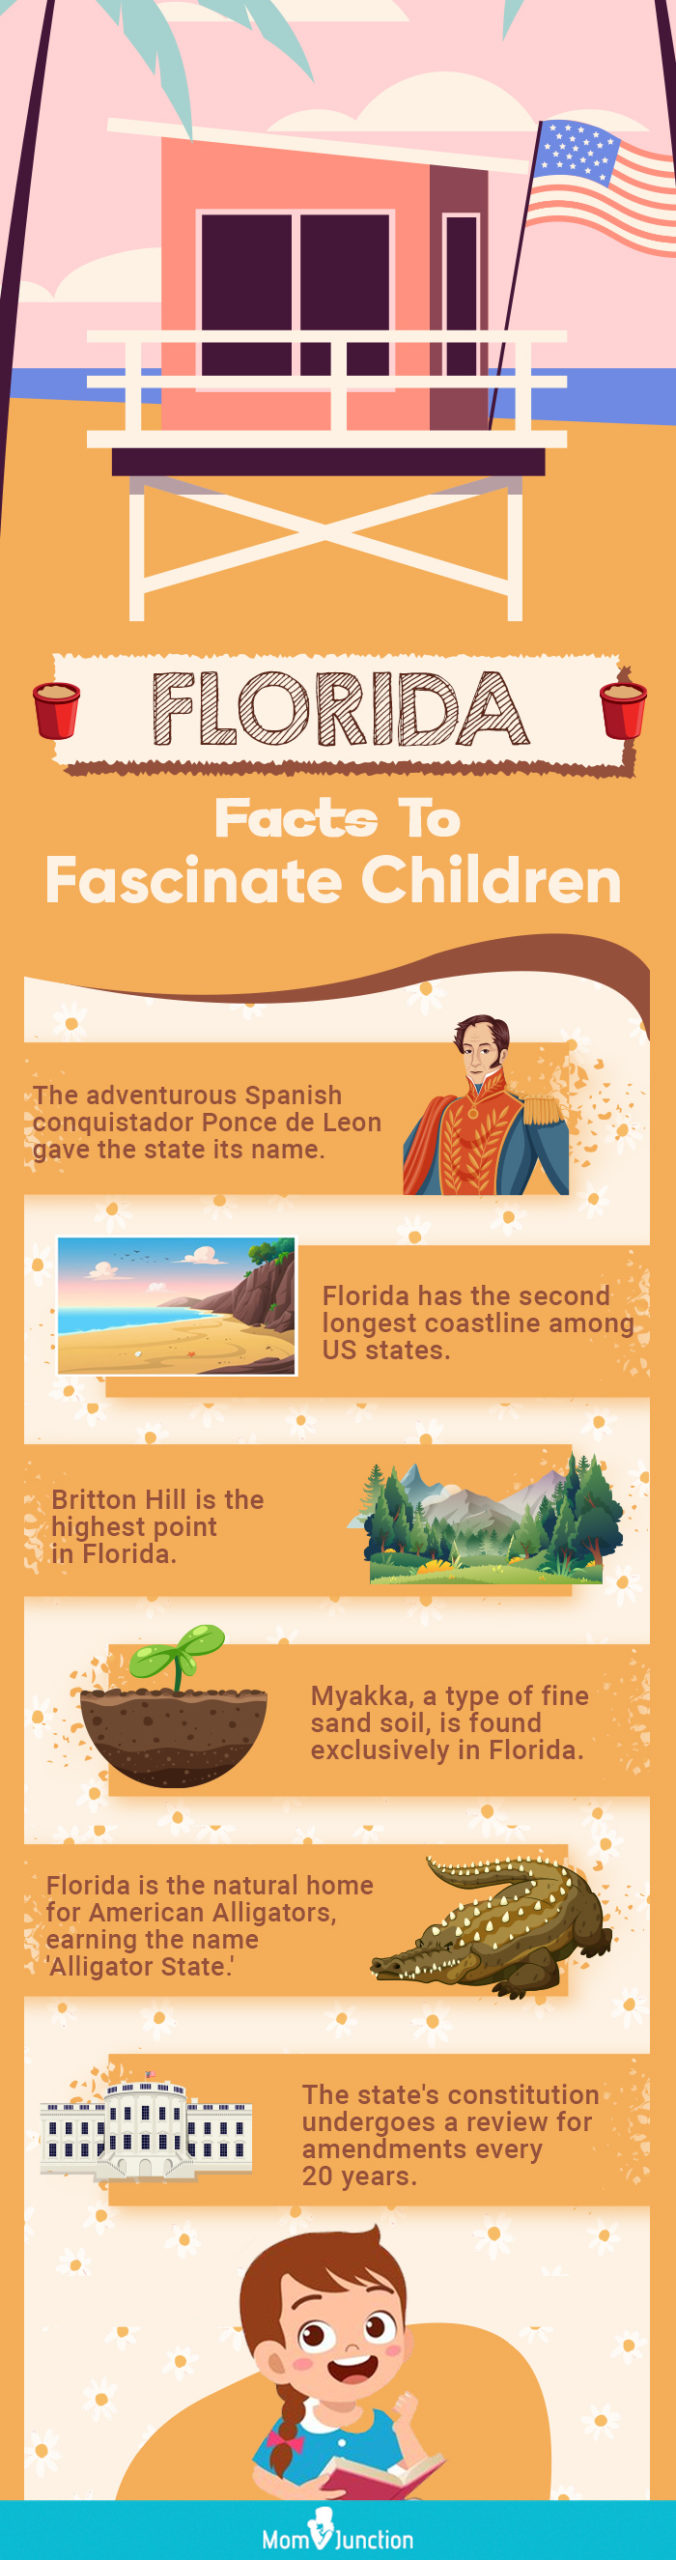 florida facts to fascinate children (infographic)